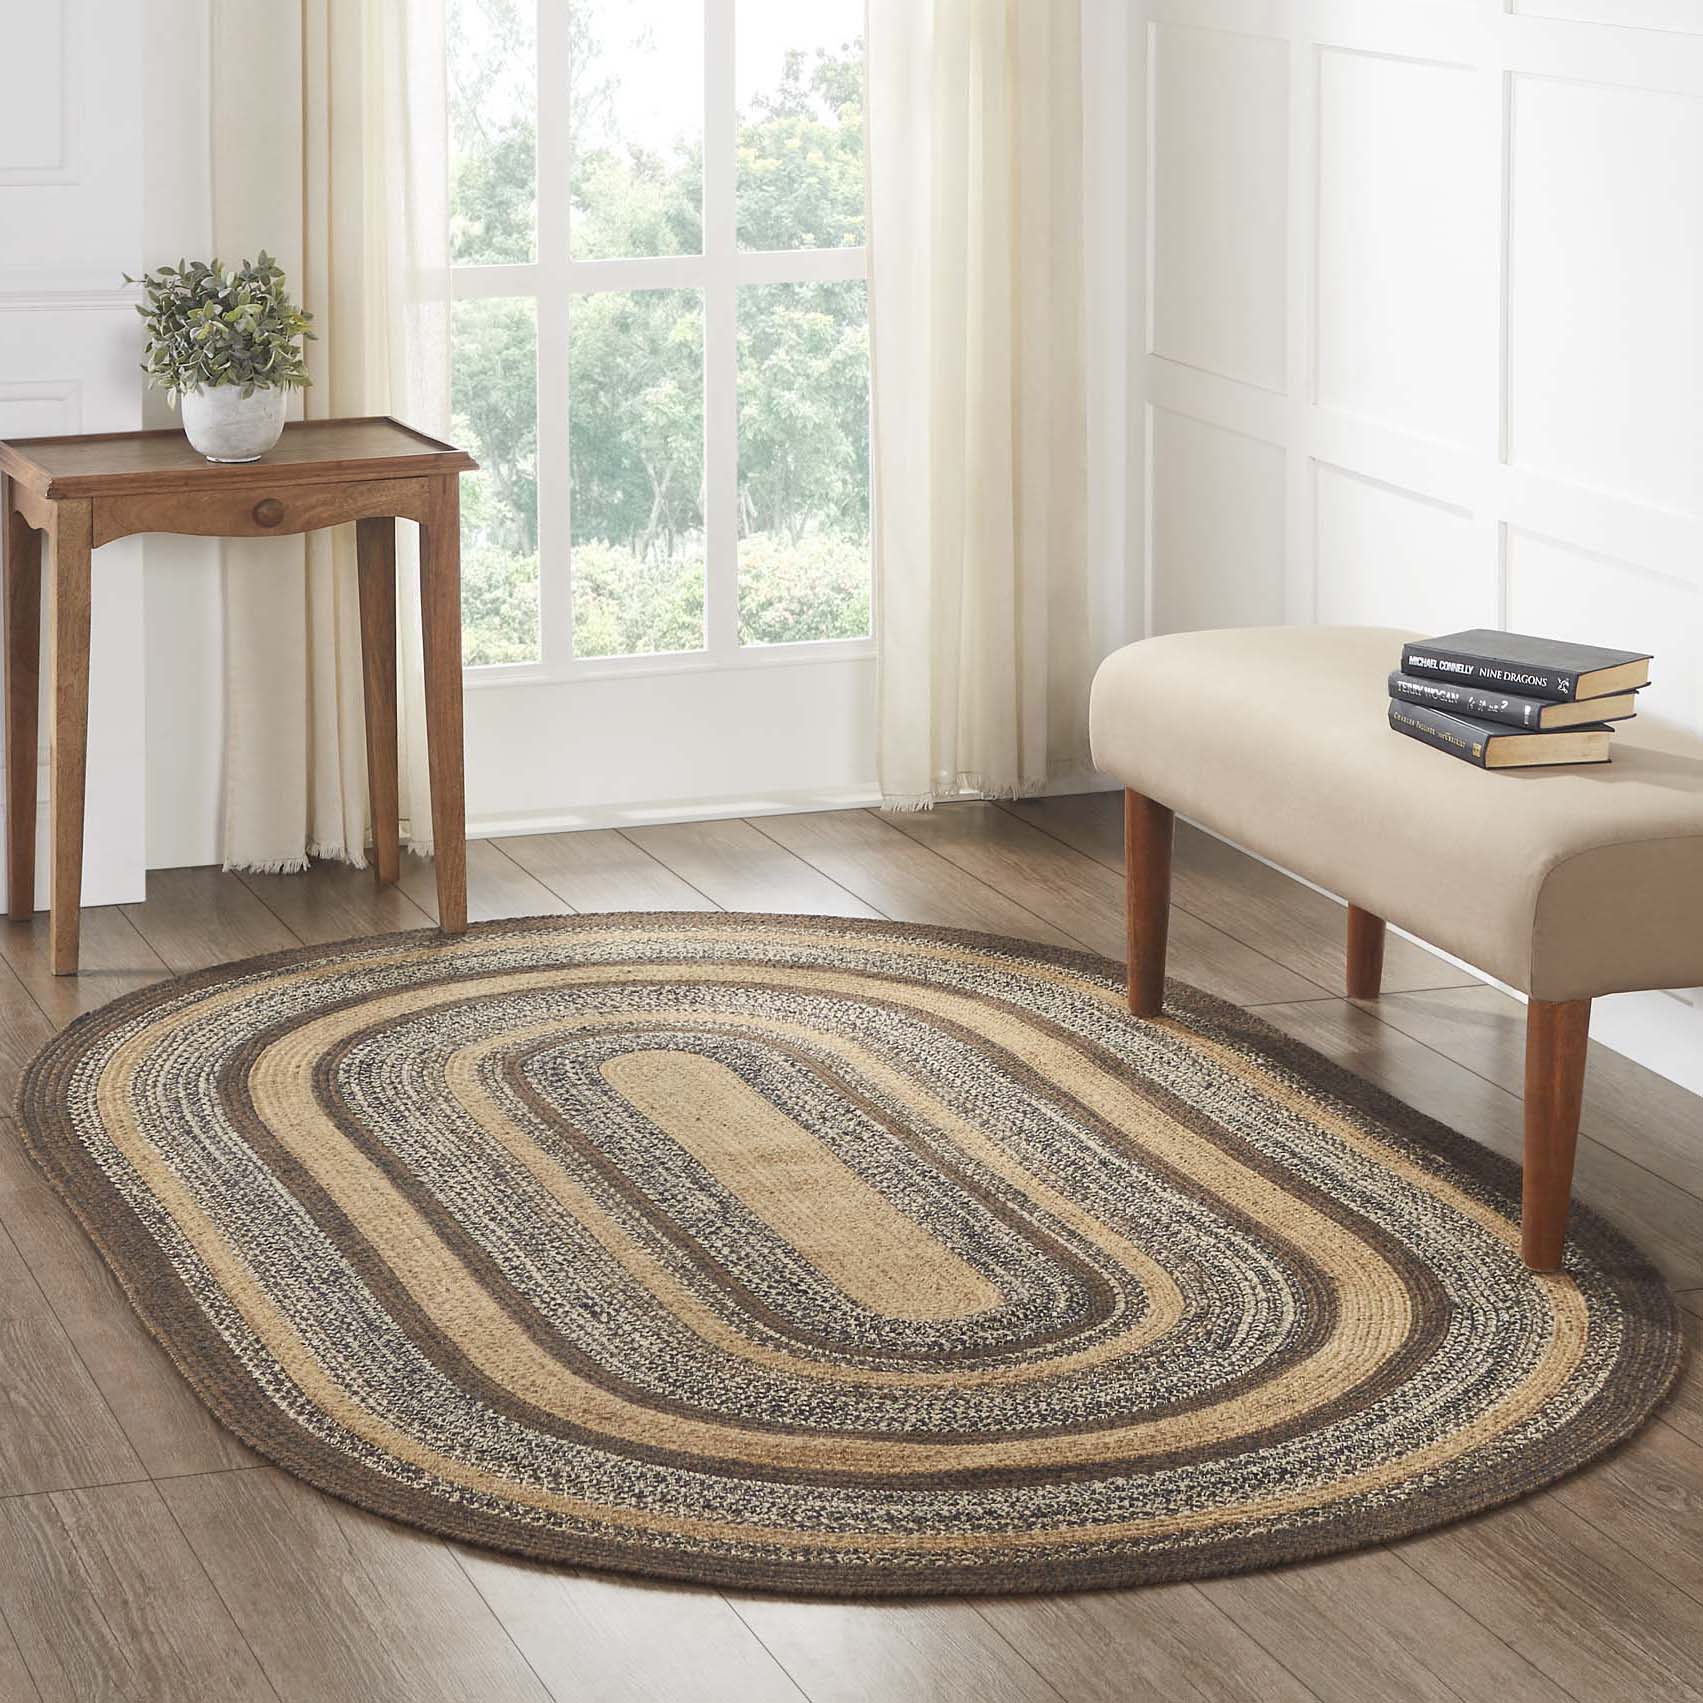 Espresso Jute Braided Rug Oval with Rug Pad 5'x8' VHC Brands